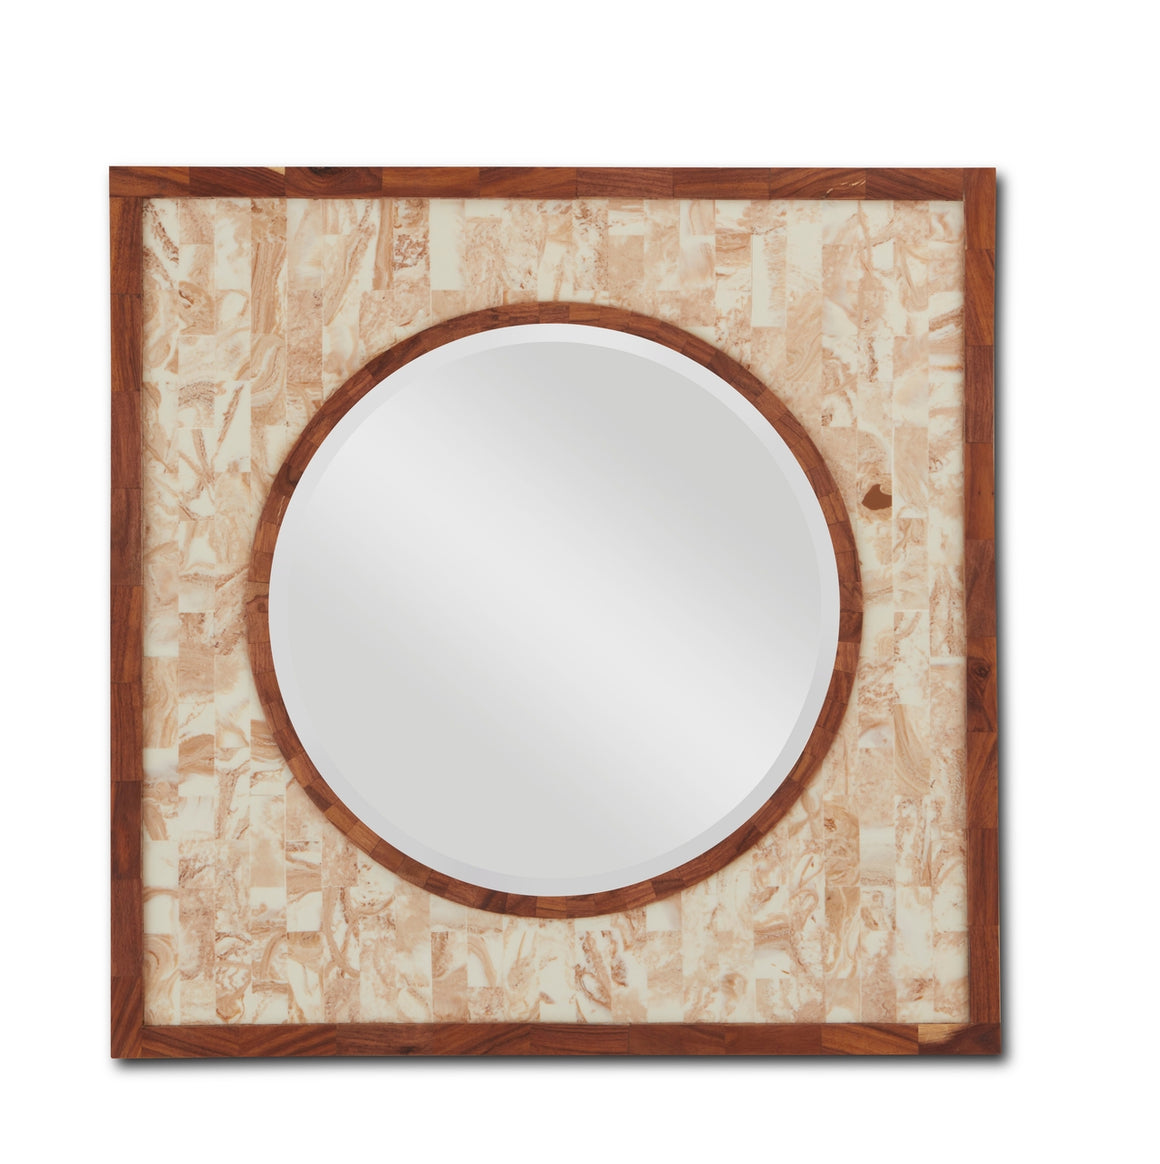 Currey and Company Serra Small Mirror -Brown Marbled